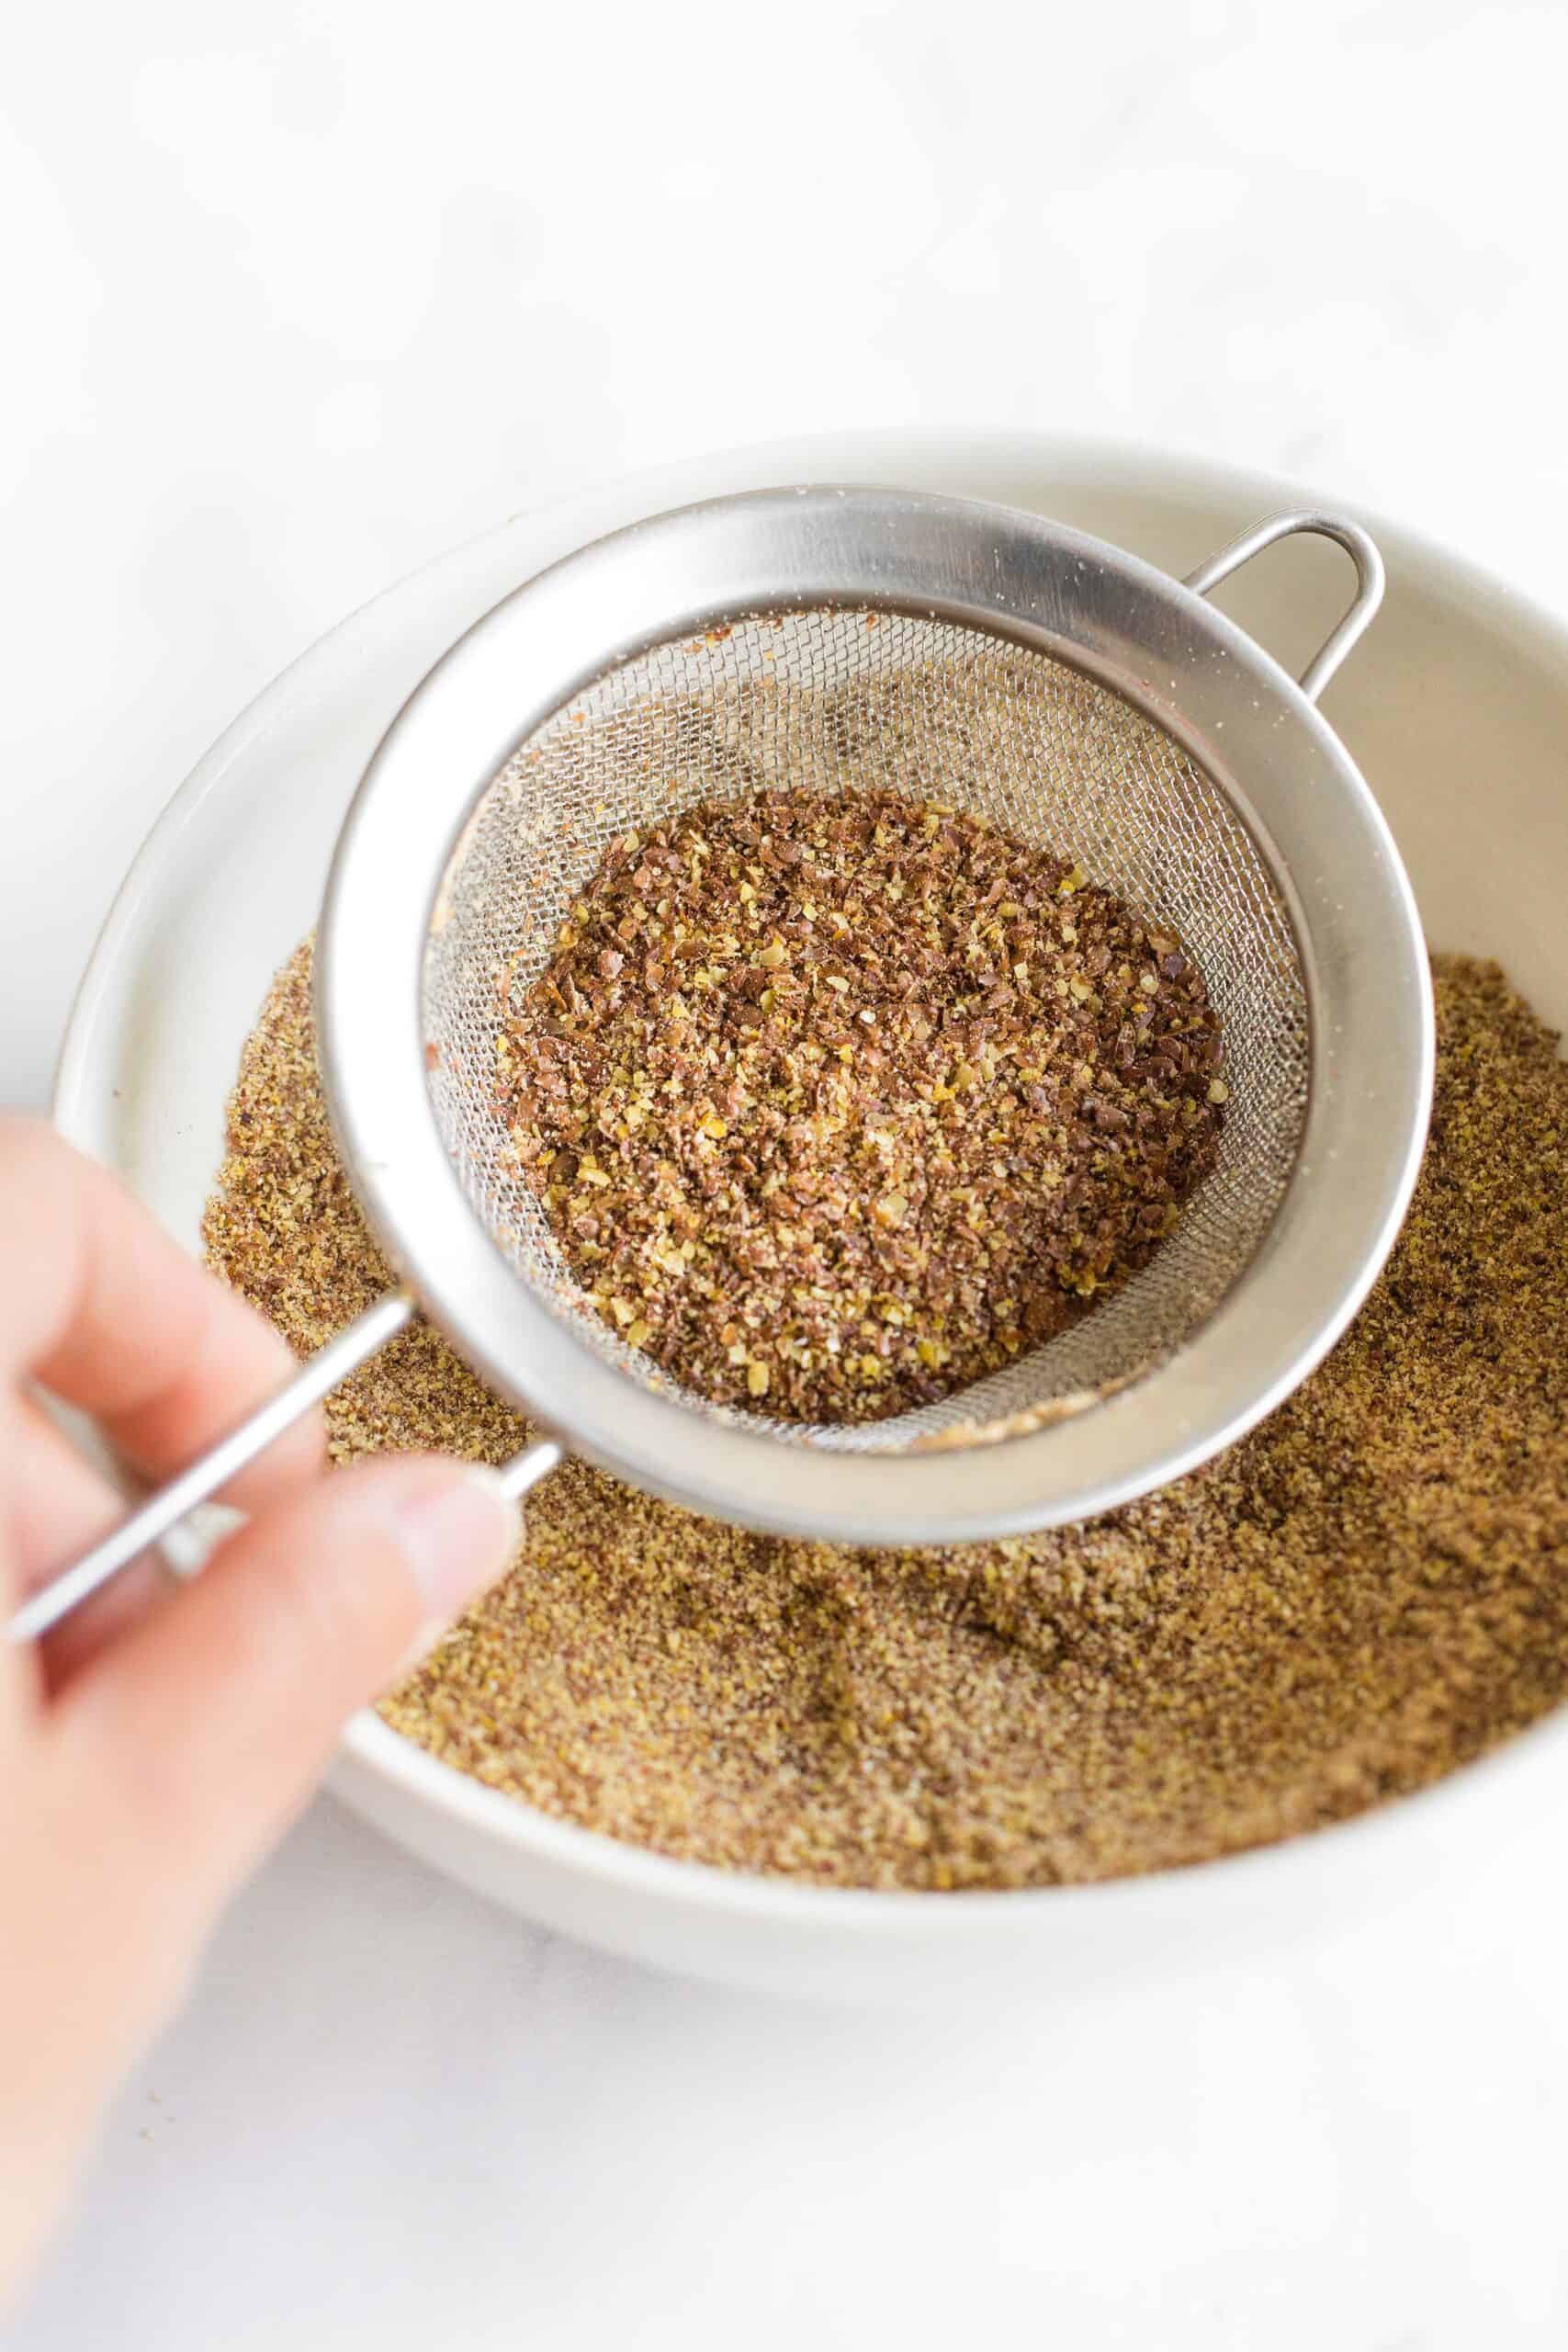 Sifting freshly ground flaxseed meal into a bowl.